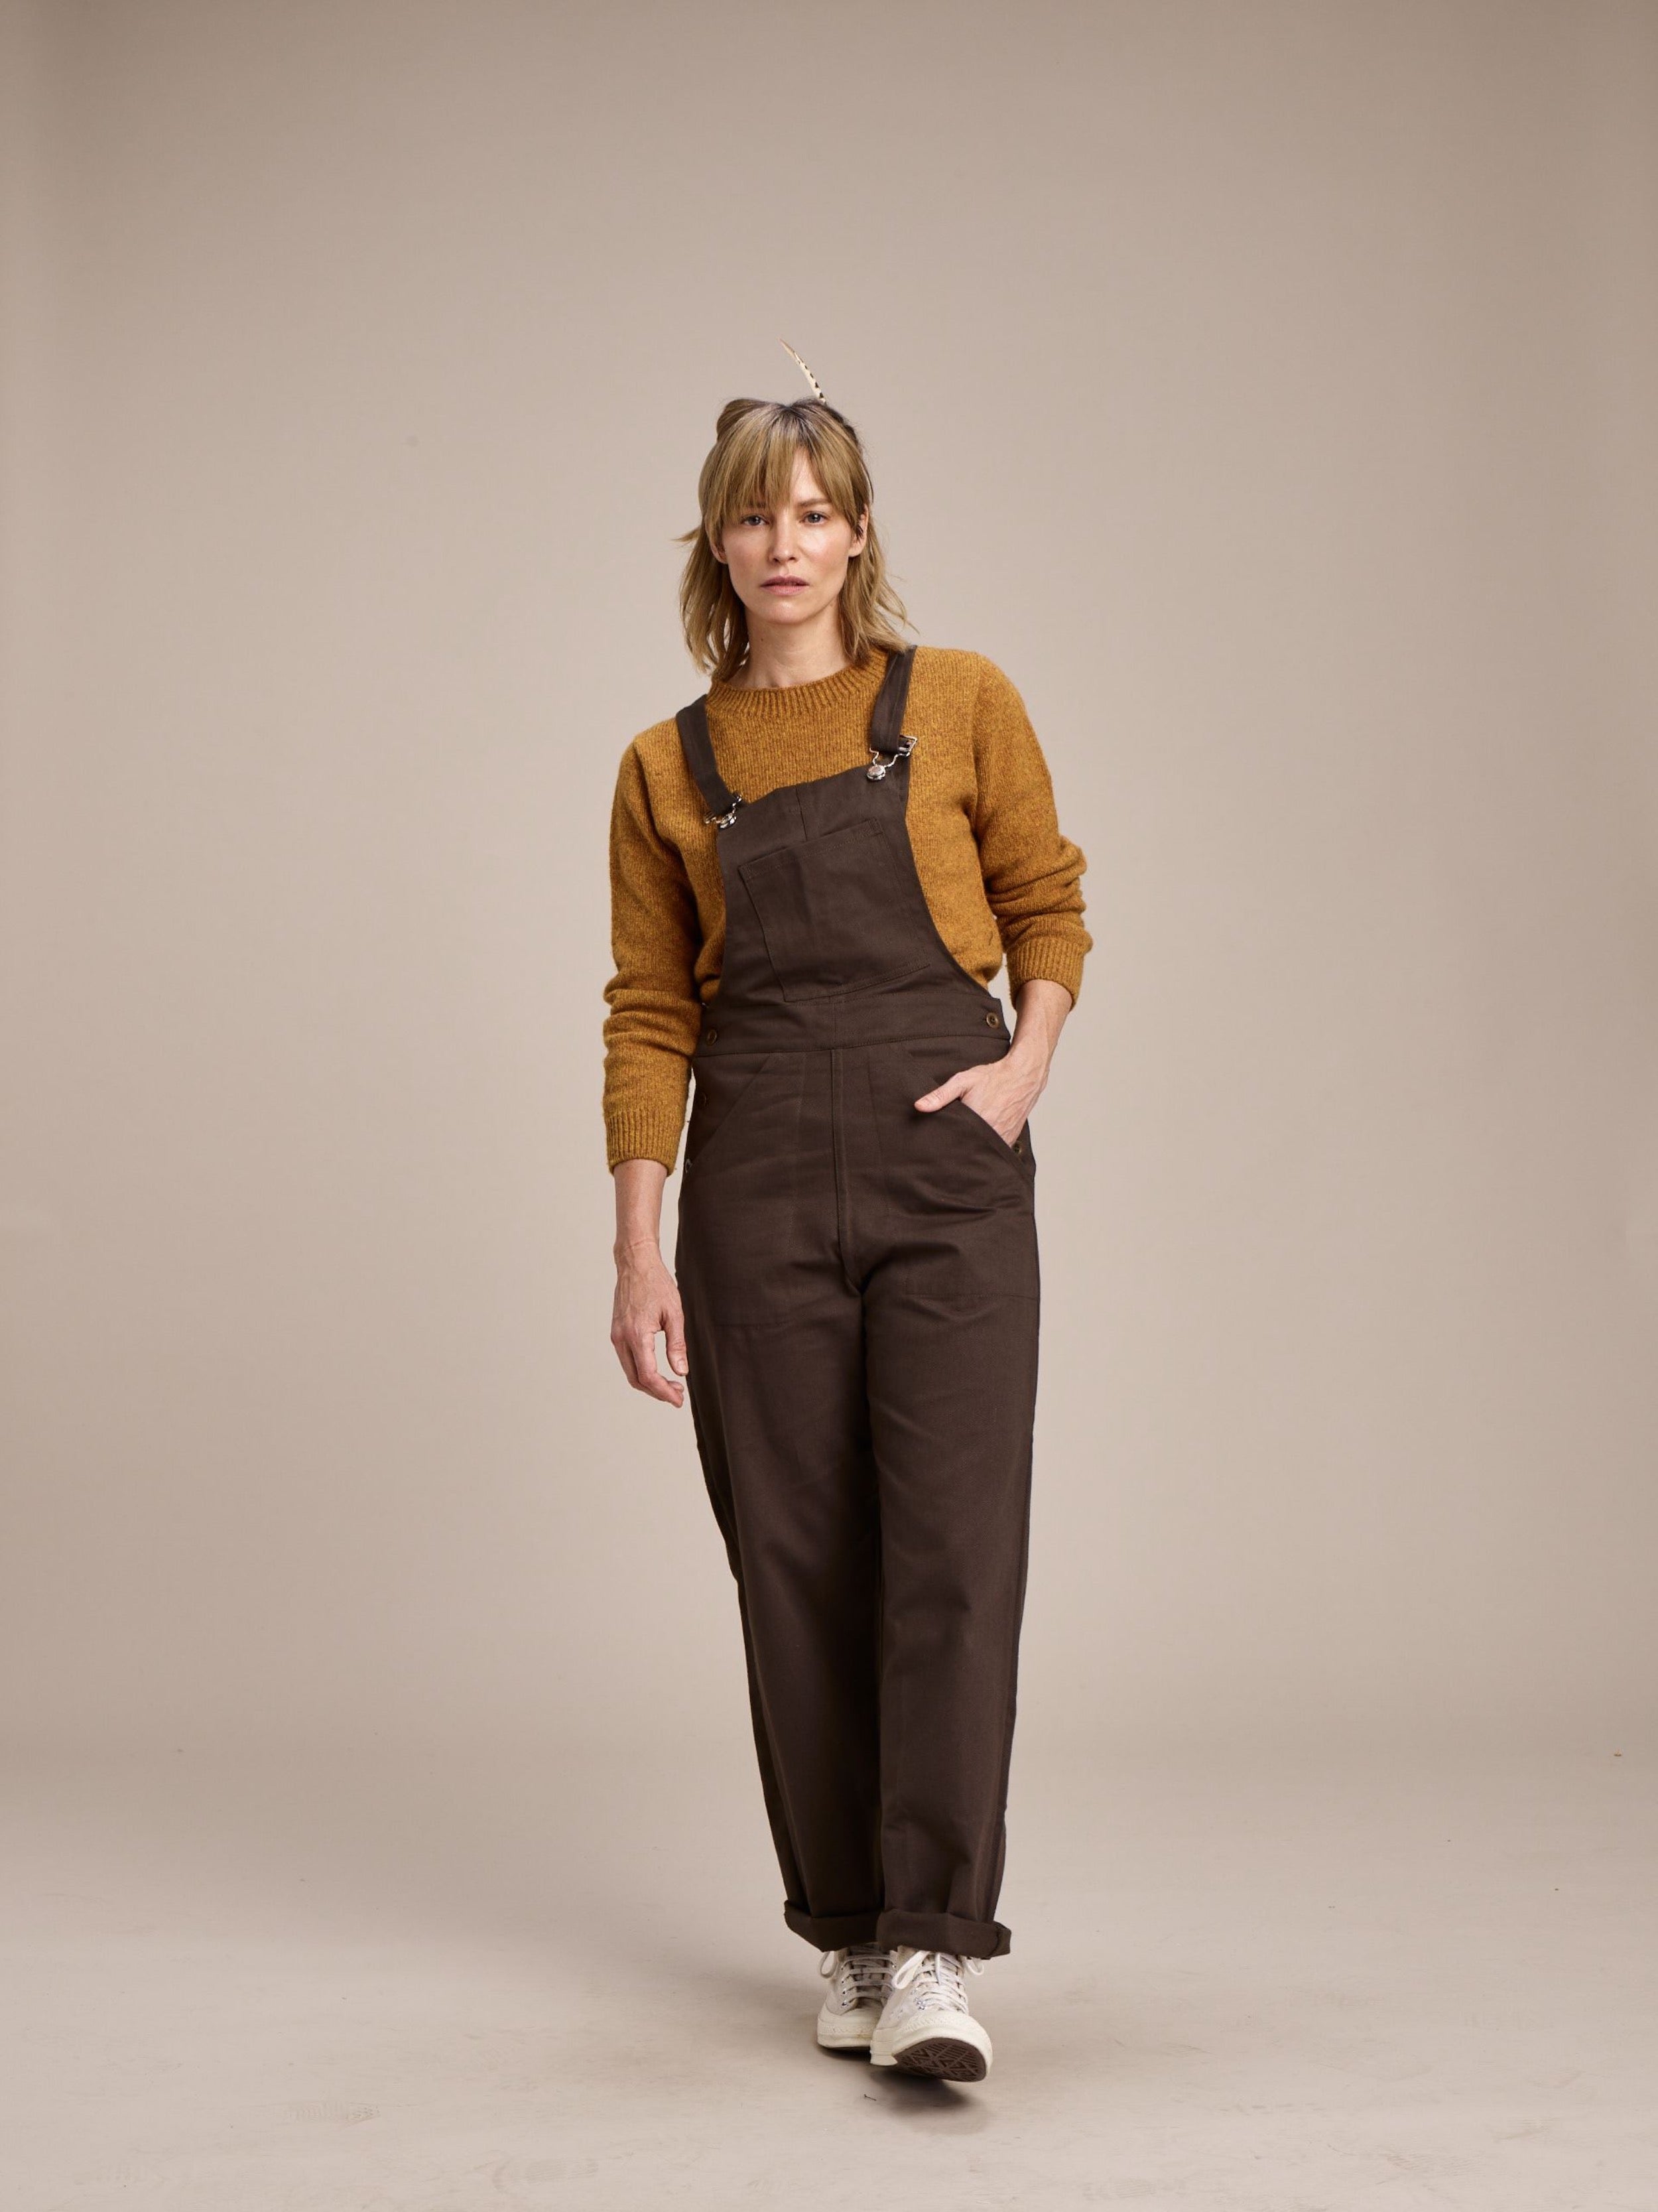 Woman wears Carrier Company Women's Dungarees in Olive with Shetland Lambswool Jumper